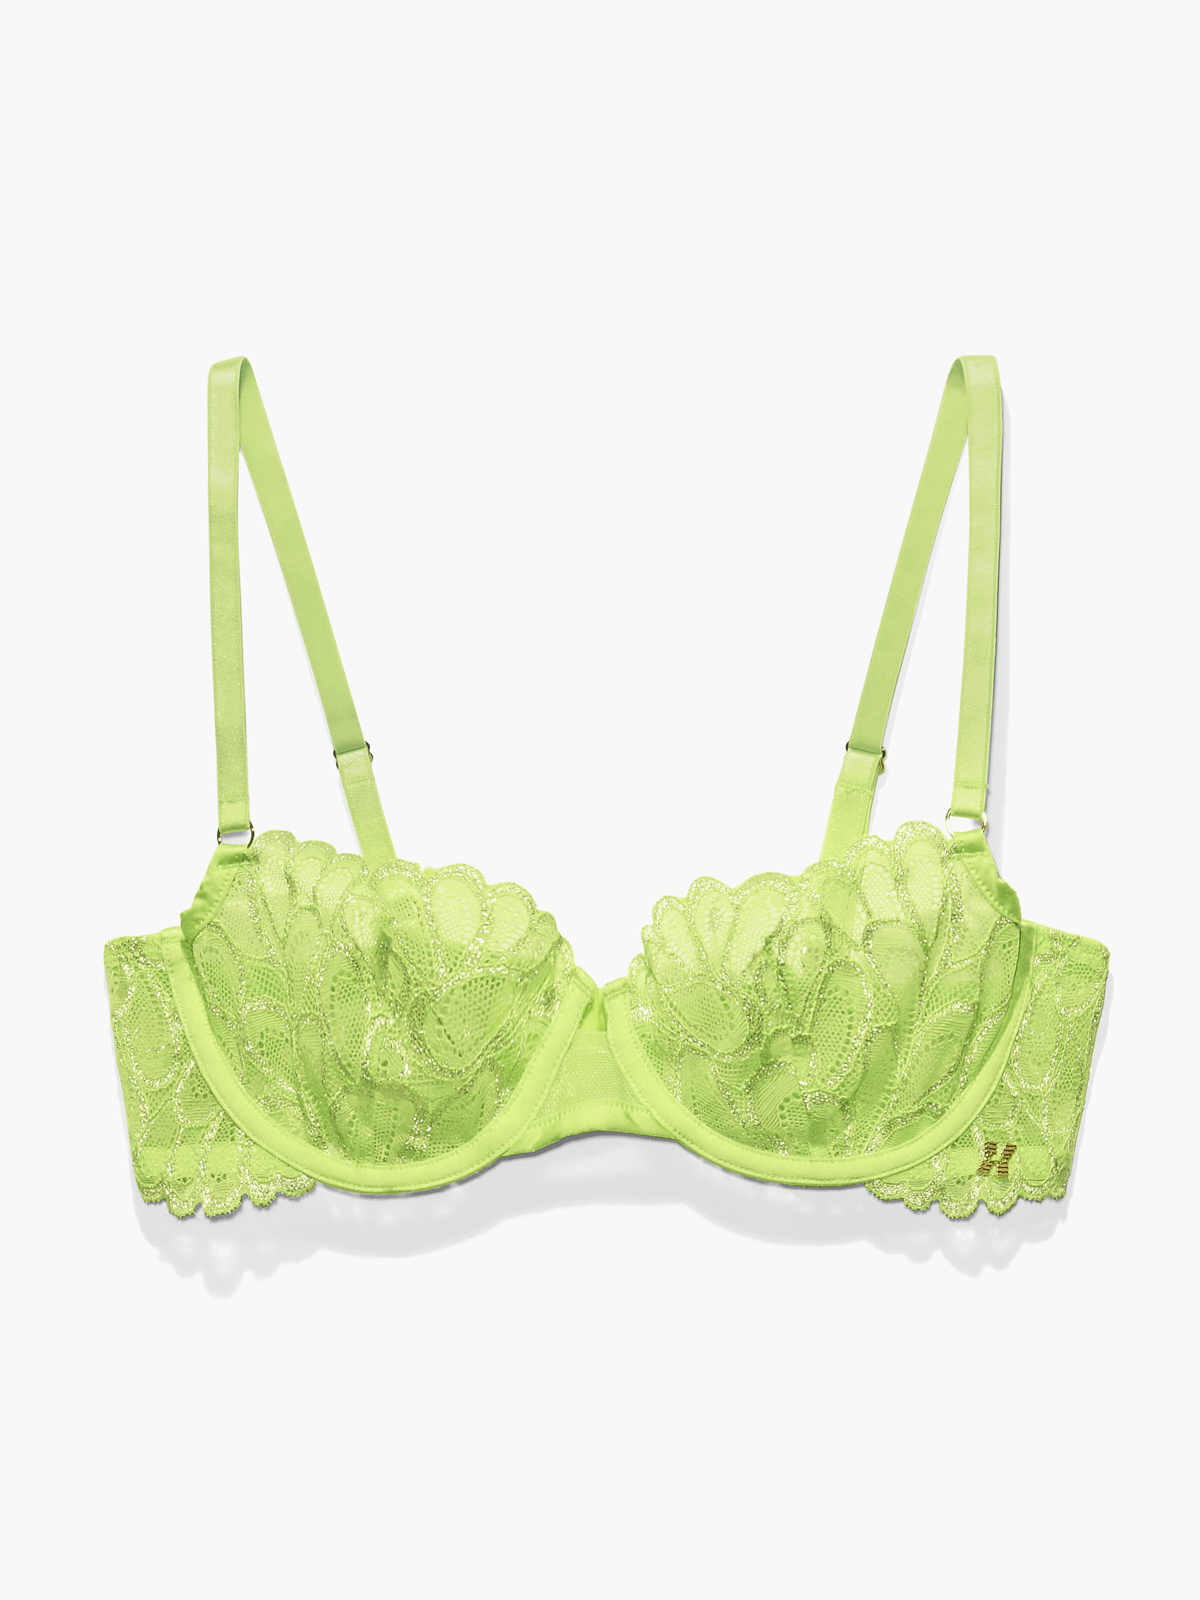 Savage Not Sorry Unlined Lace Balconette Bra in Green | SAVAGE X FENTY